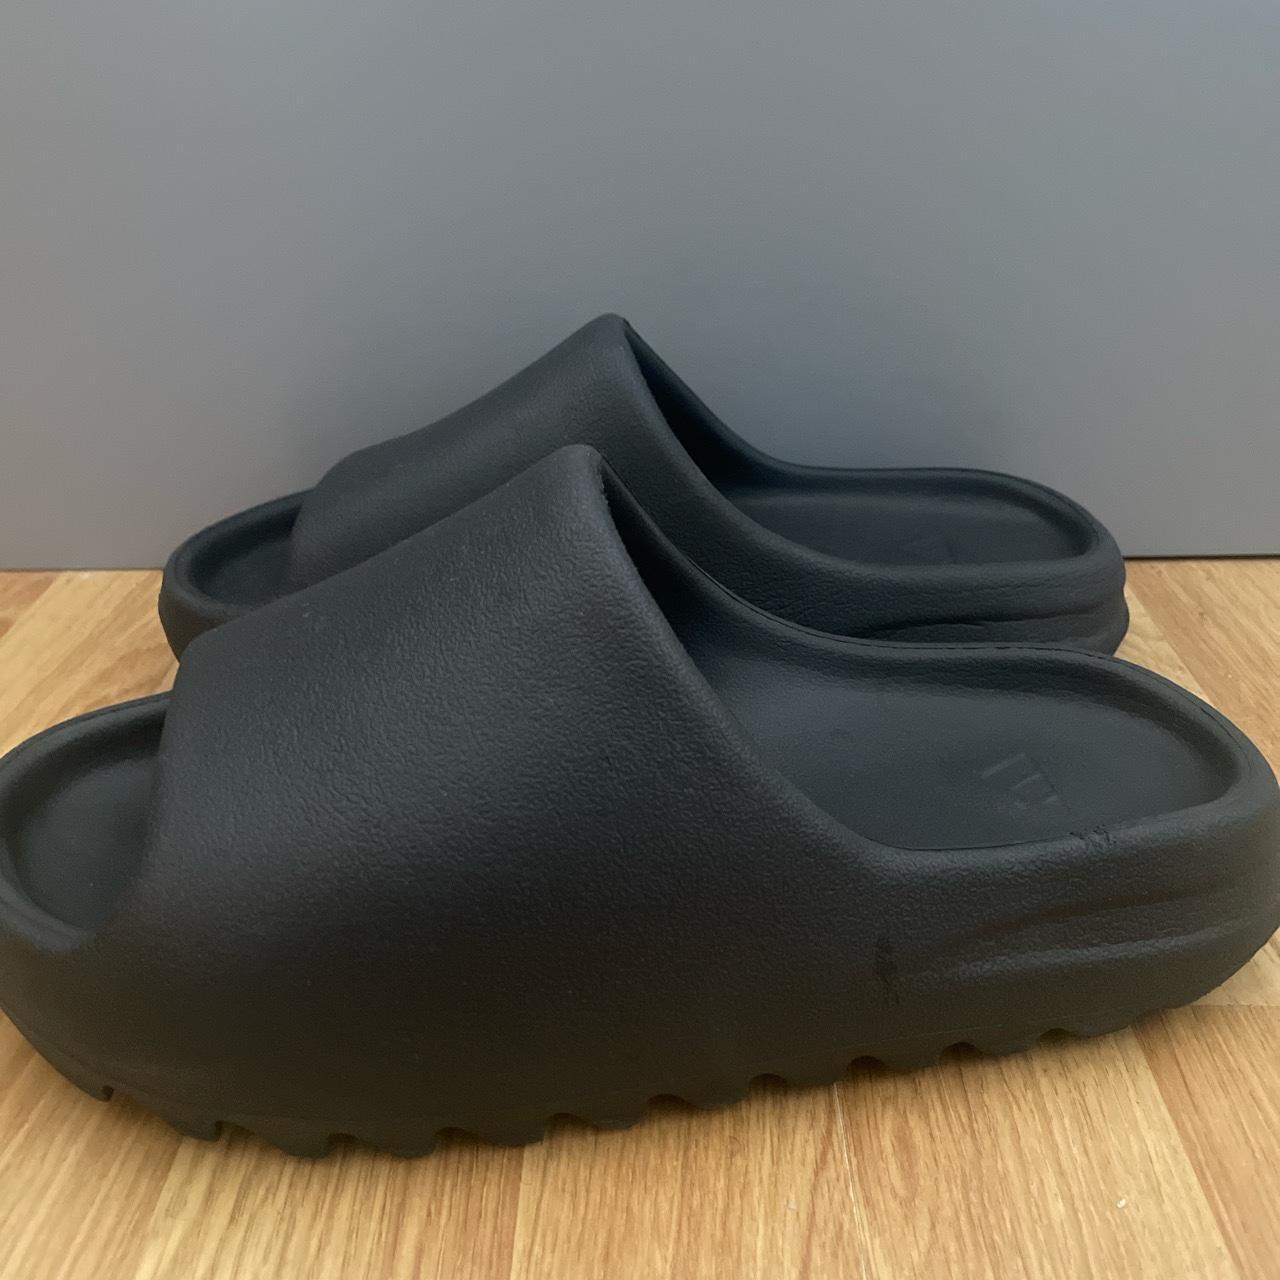 Black onyx Yeezy slides Size 7 Used once but in... - Depop